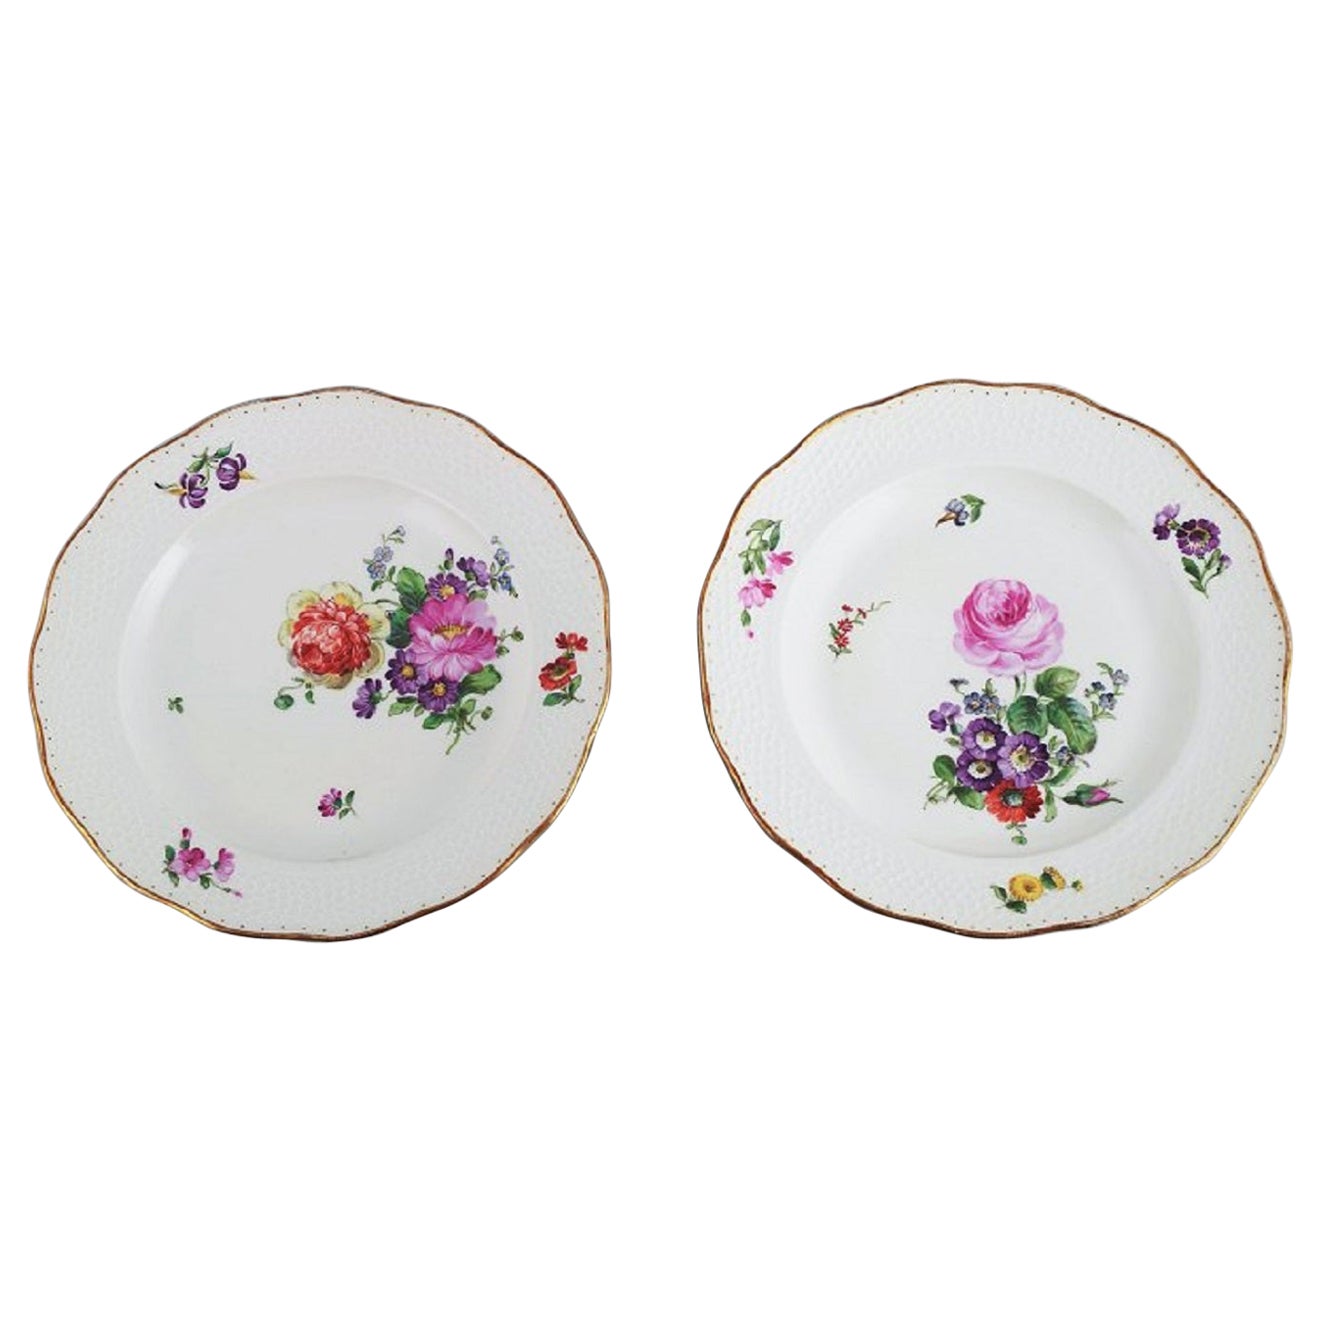 Royal Copenhagen Saxon Flower, Two Dinner Plates with Hand-Painted Flowers